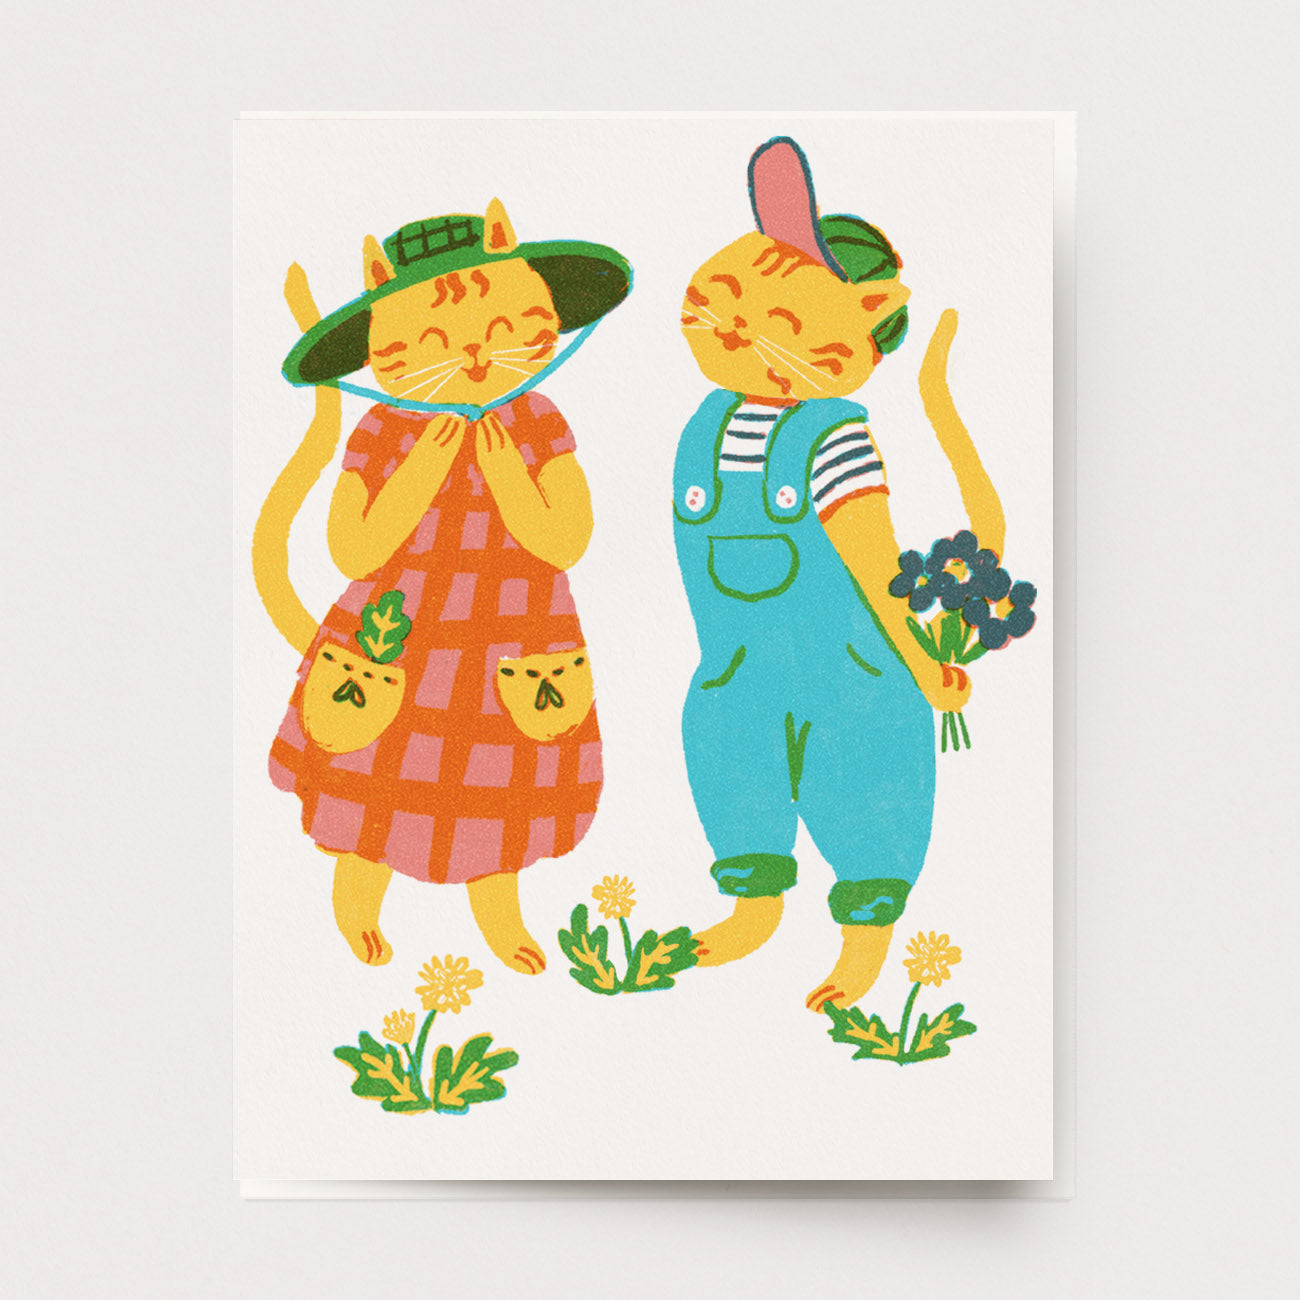 A love greeting card of two young kittens, illustrated in a vintage screenprint style. Made by Ingrid Press card and gift company, ethically printed in the USA.